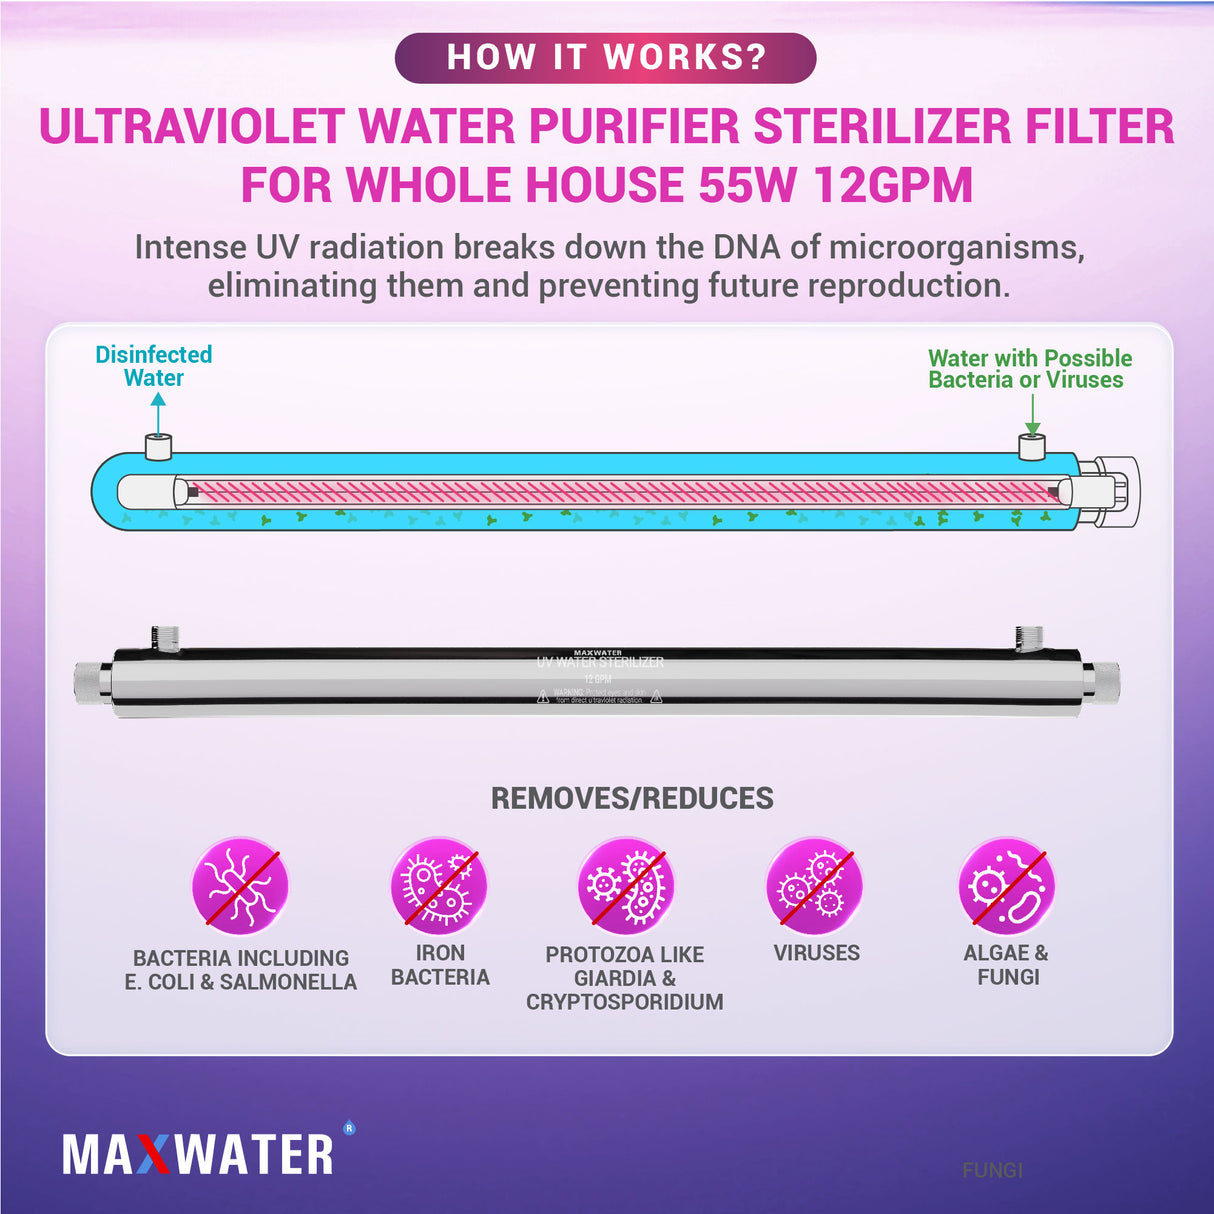 Ultraviolet Light Water Purifier 55W 12GPM - 1" Inlet/Outlet, Light and Audio Alarm Ballast